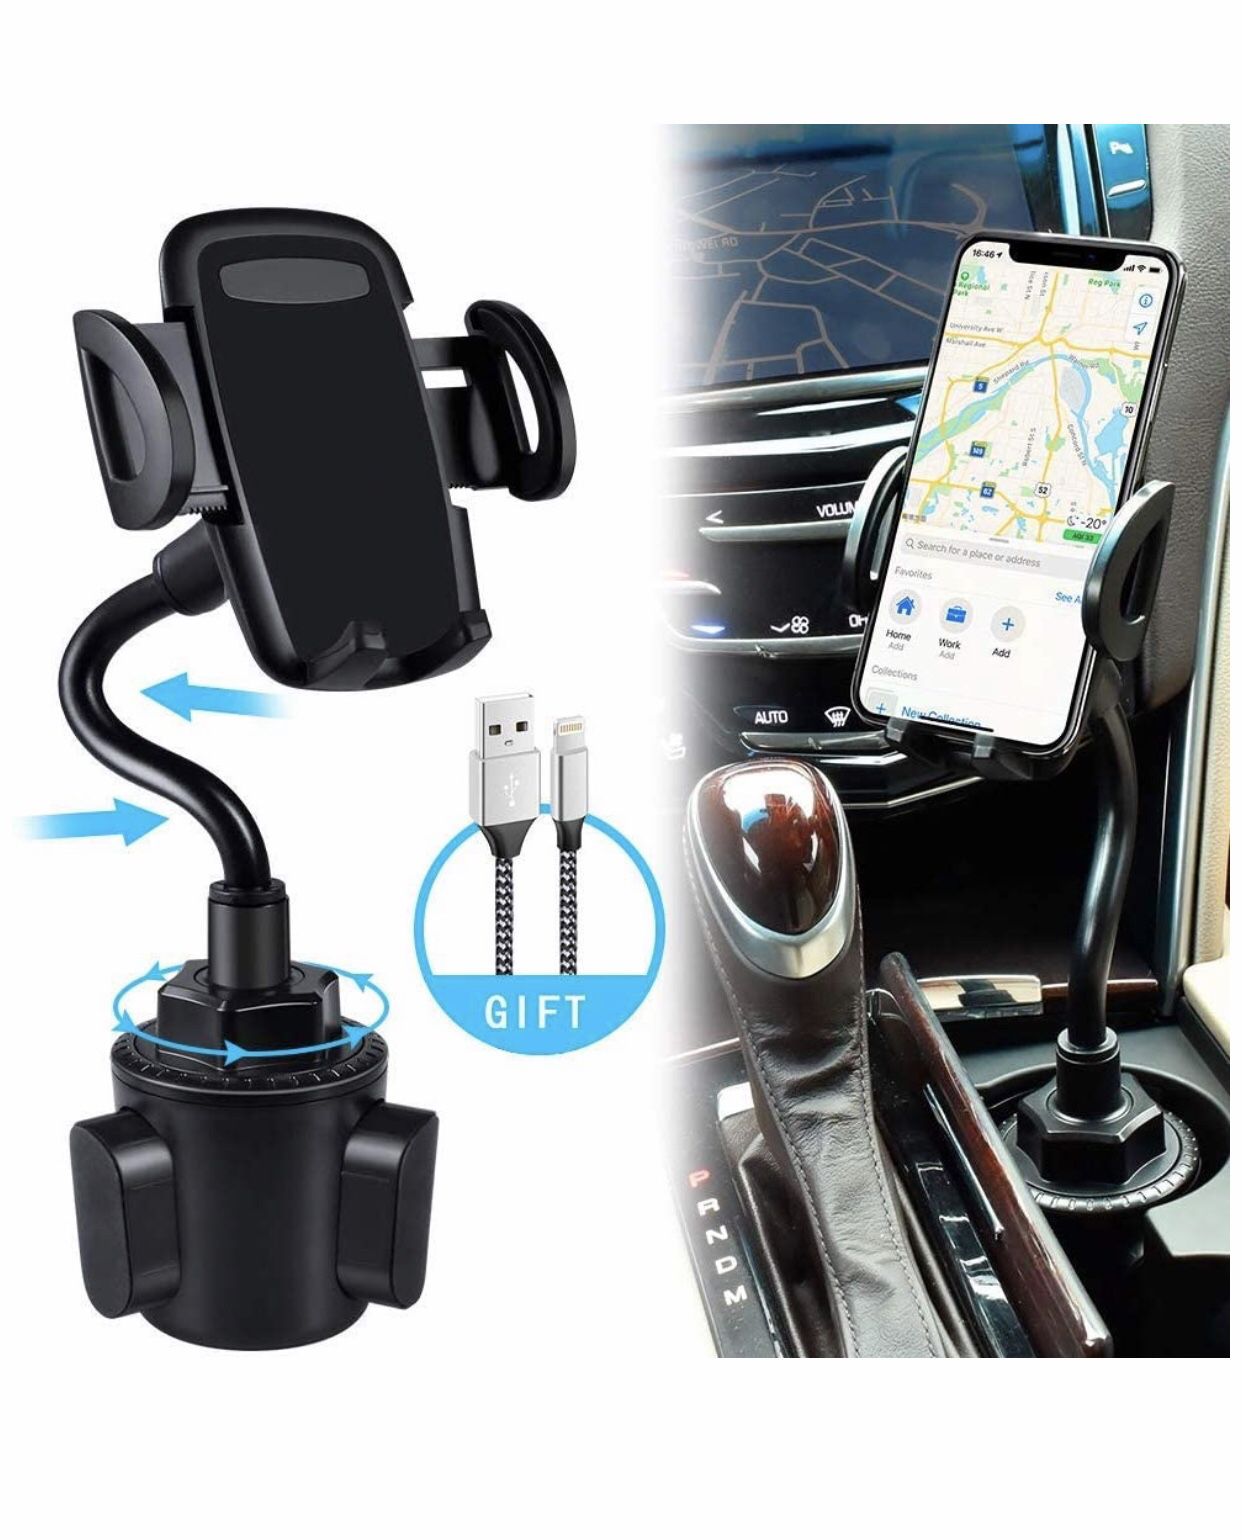 bokilino Car Cup Holder Phone Mount, Universal Adjustable Gooseneck Cup Holder Cradle Car Mount for Cell Phone iPhone 11 Pro/11 Pro Max/11/X/Xs/Xs Ma